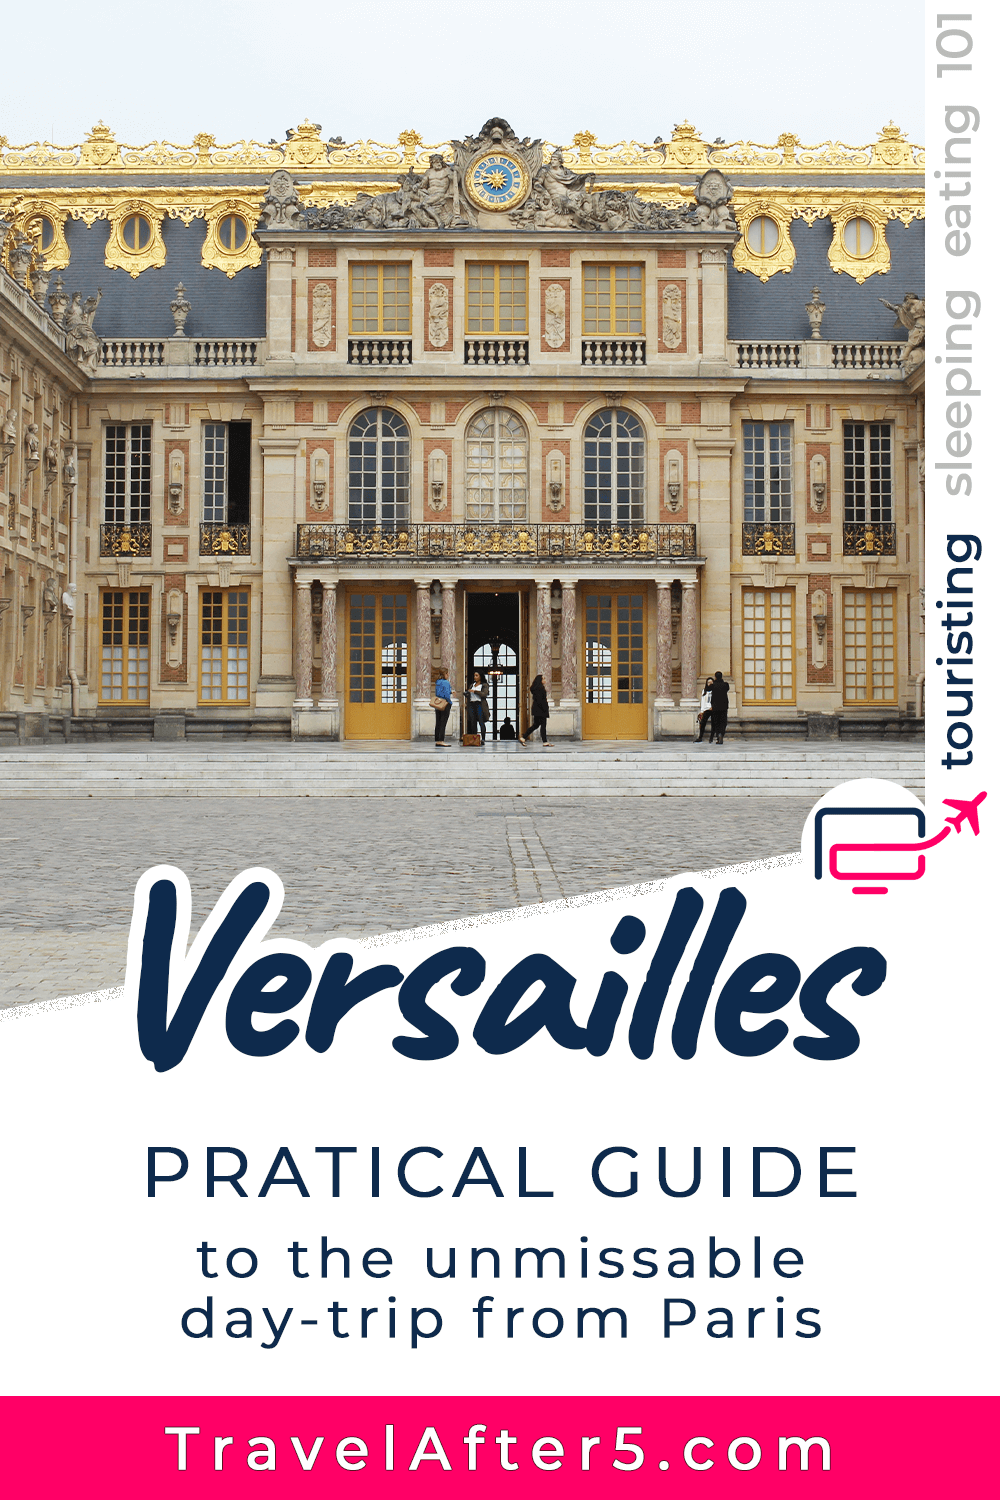 Pinterest Pin_Day-Trip to Versailles, by Travel After 5